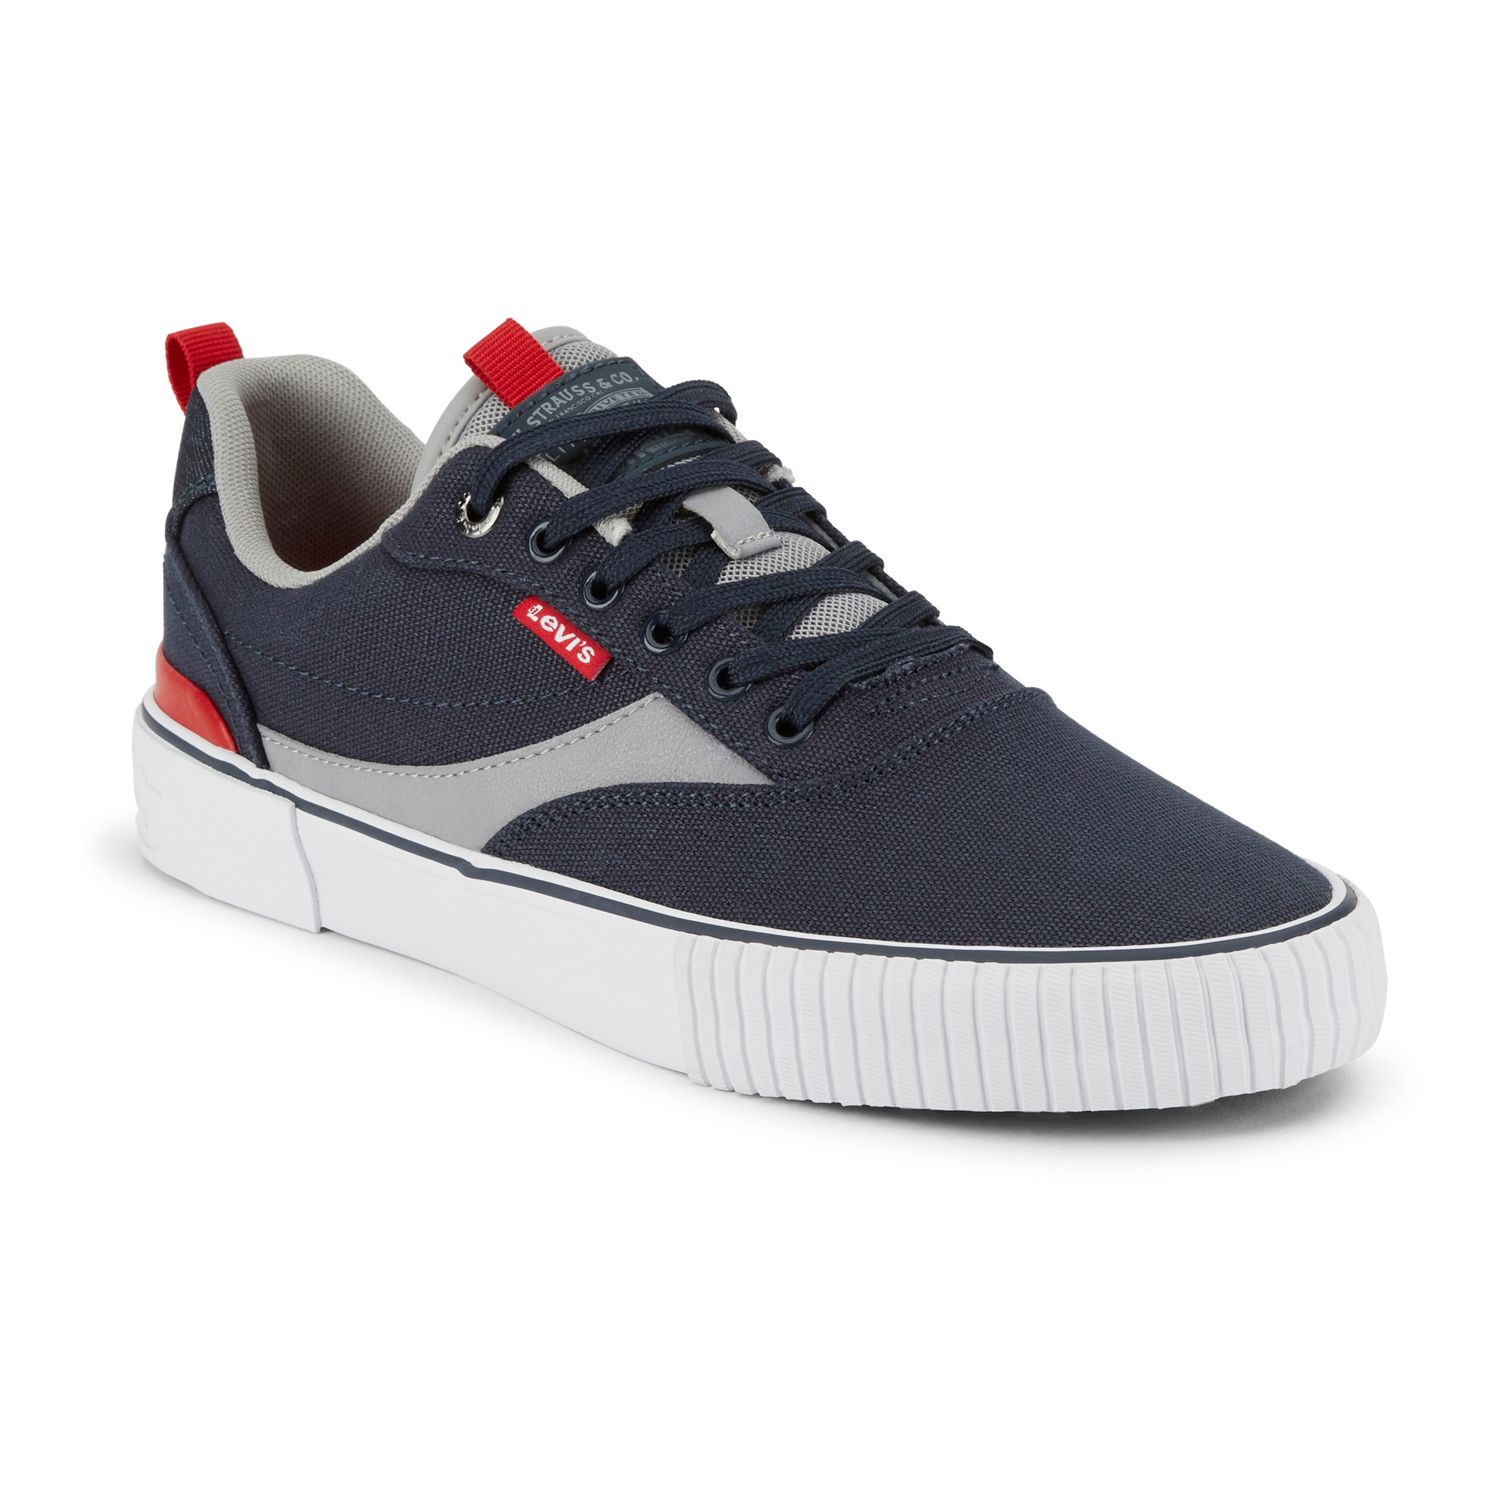 Image for Levi's Lance Lo Sport Men's Sneakers at Kohl's.